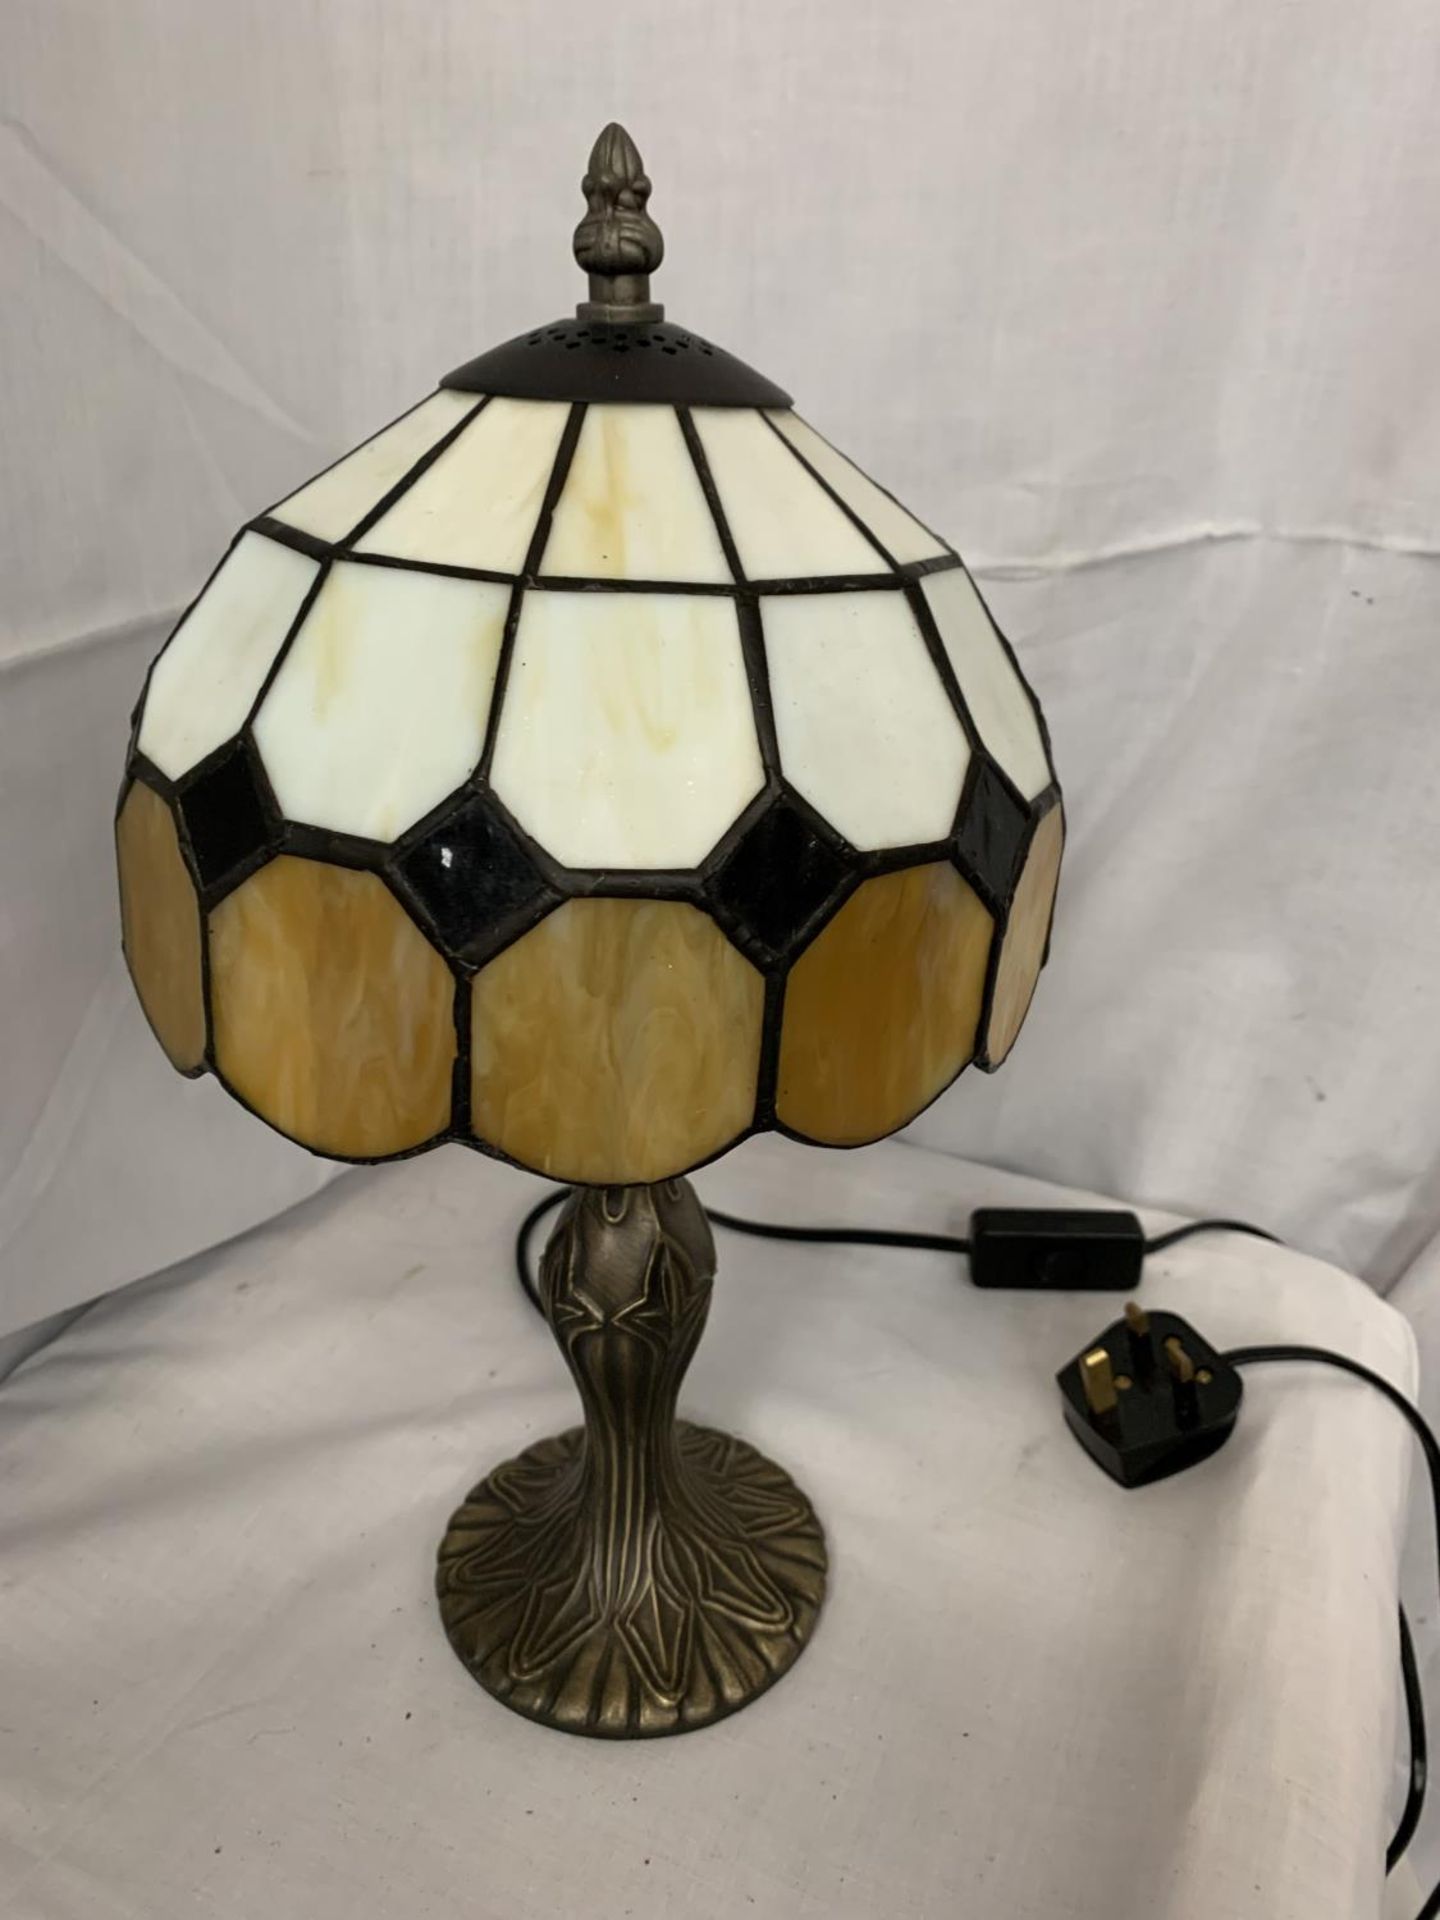 A TIFFANY STYLE TABLE LAMP WITH BRONZE EFFECT BASE, HEIGHT 38CM